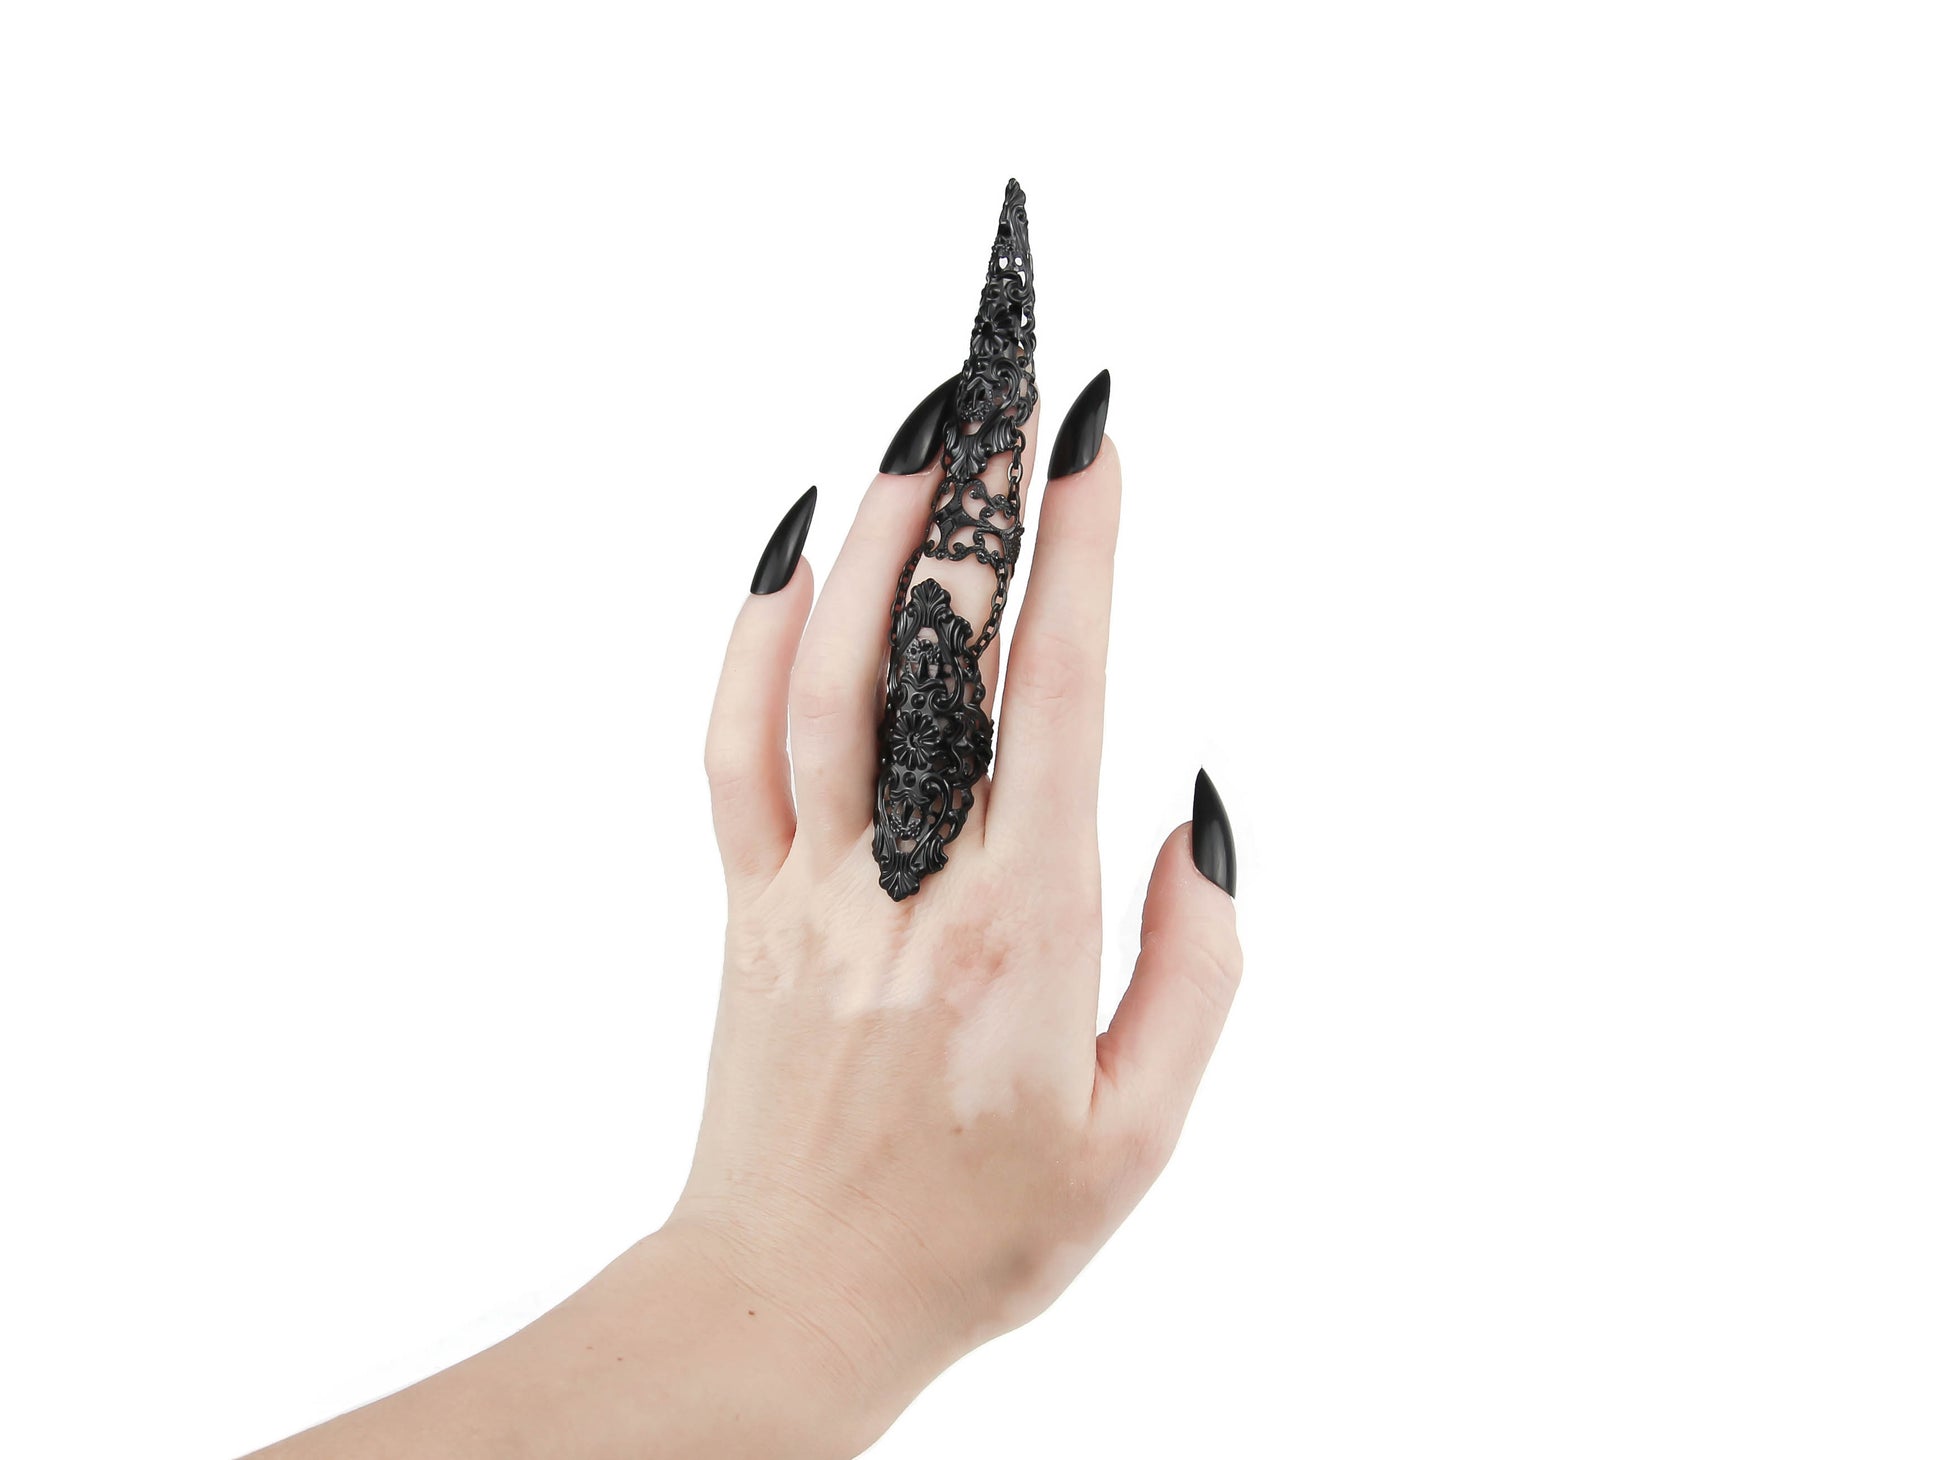 A hand models a stunning Myril Jewels full-finger ring on the middle finger, its black filigree design embodying the dark-avantgarde aesthetic. This handcrafted Italian jewelry piece, perfect for gothic and alternative style enthusiasts, makes a bold statement with its intricate details and elegant chain connection, set against a crisp white background